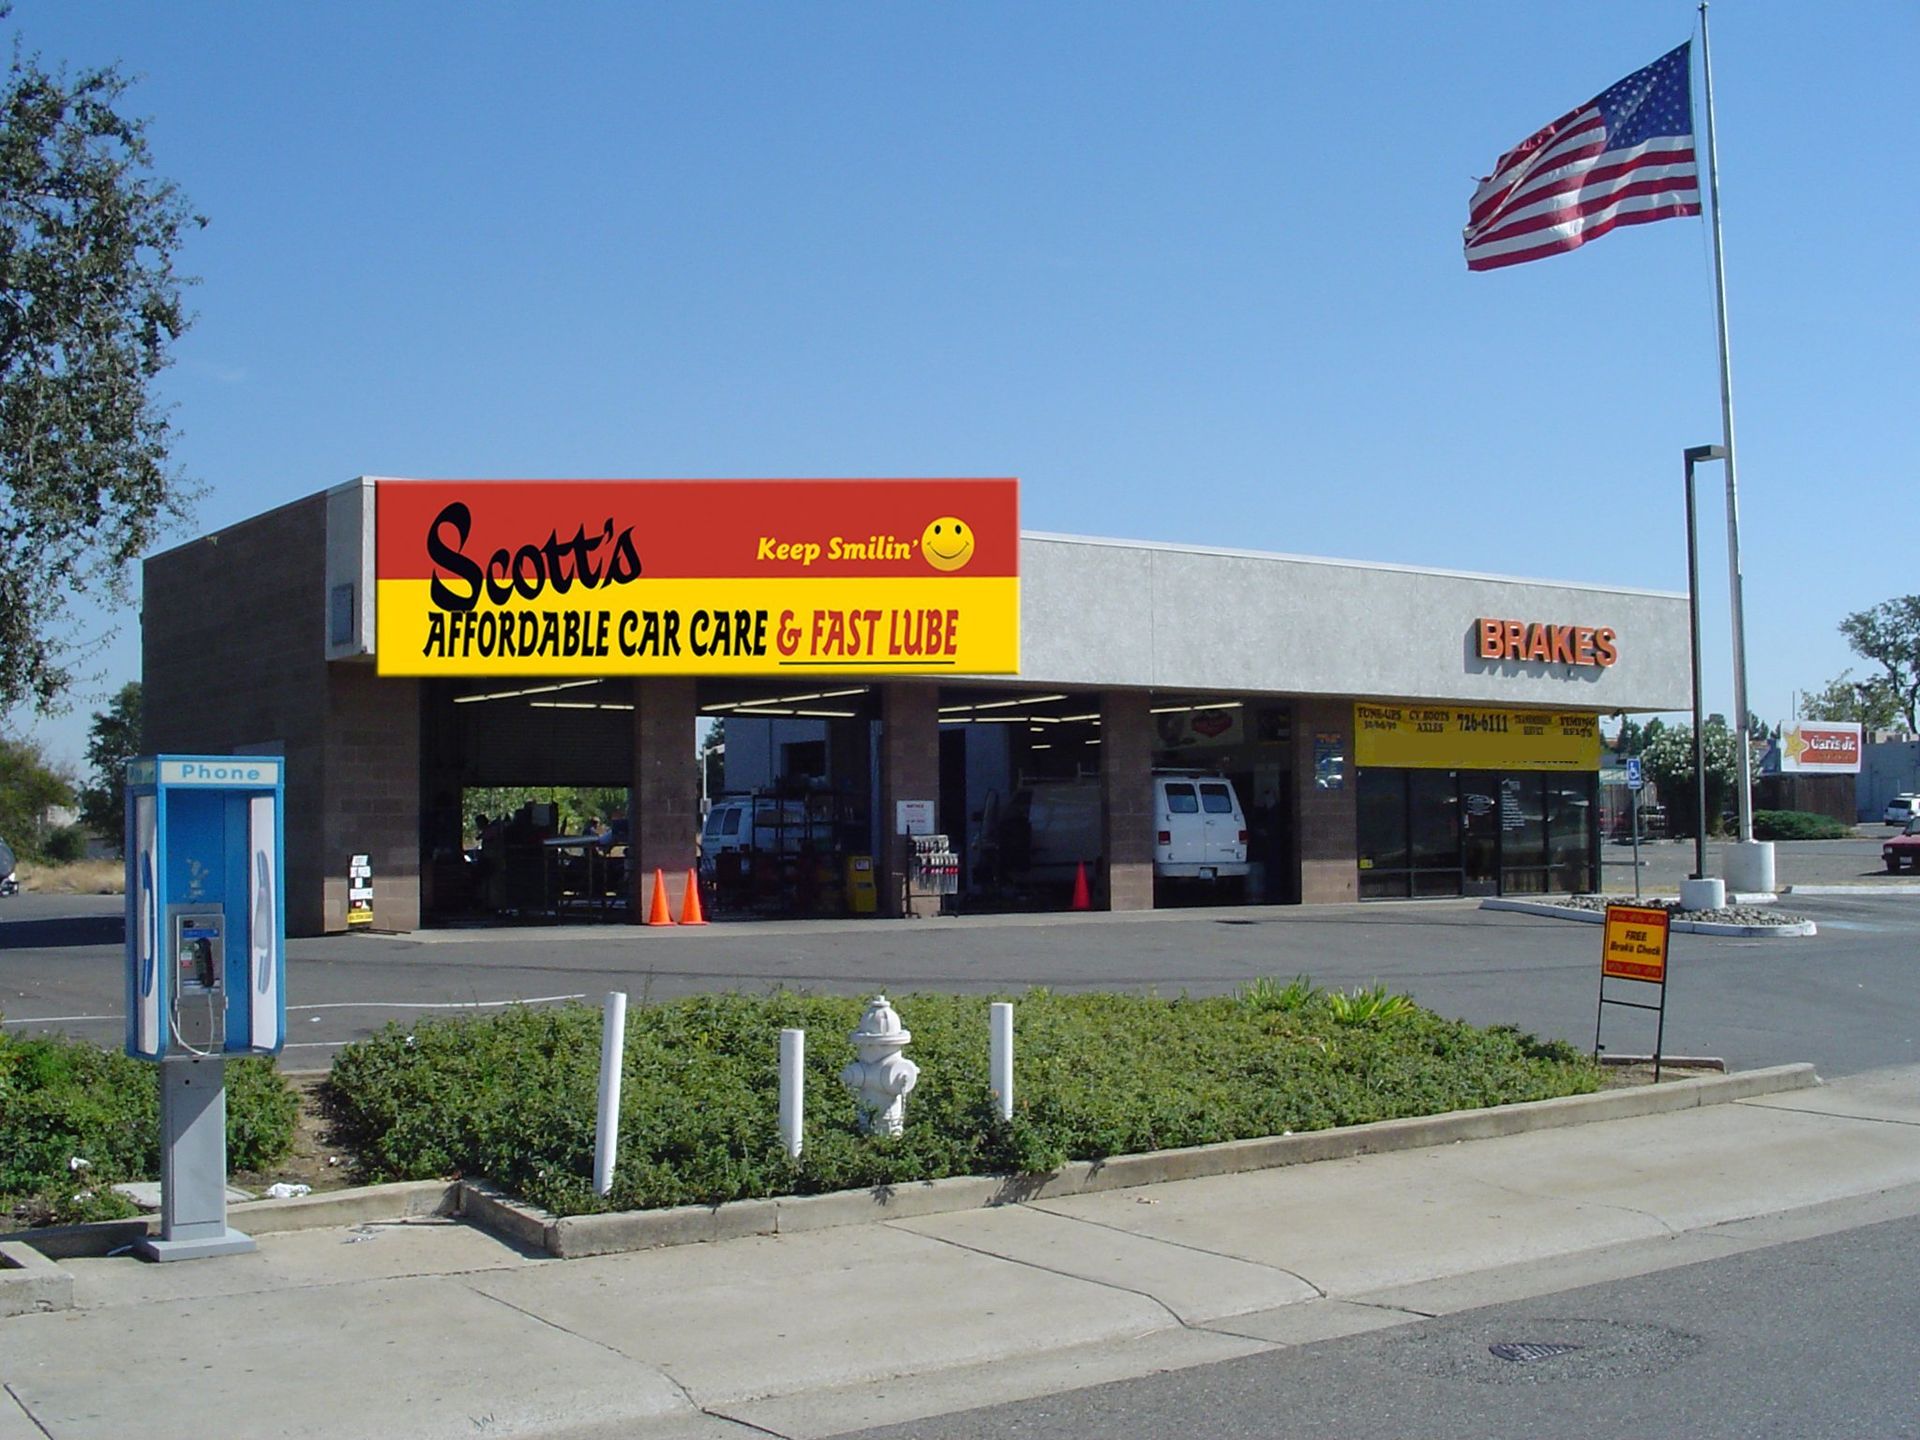 Scotts affordable car care in Citrus Heights